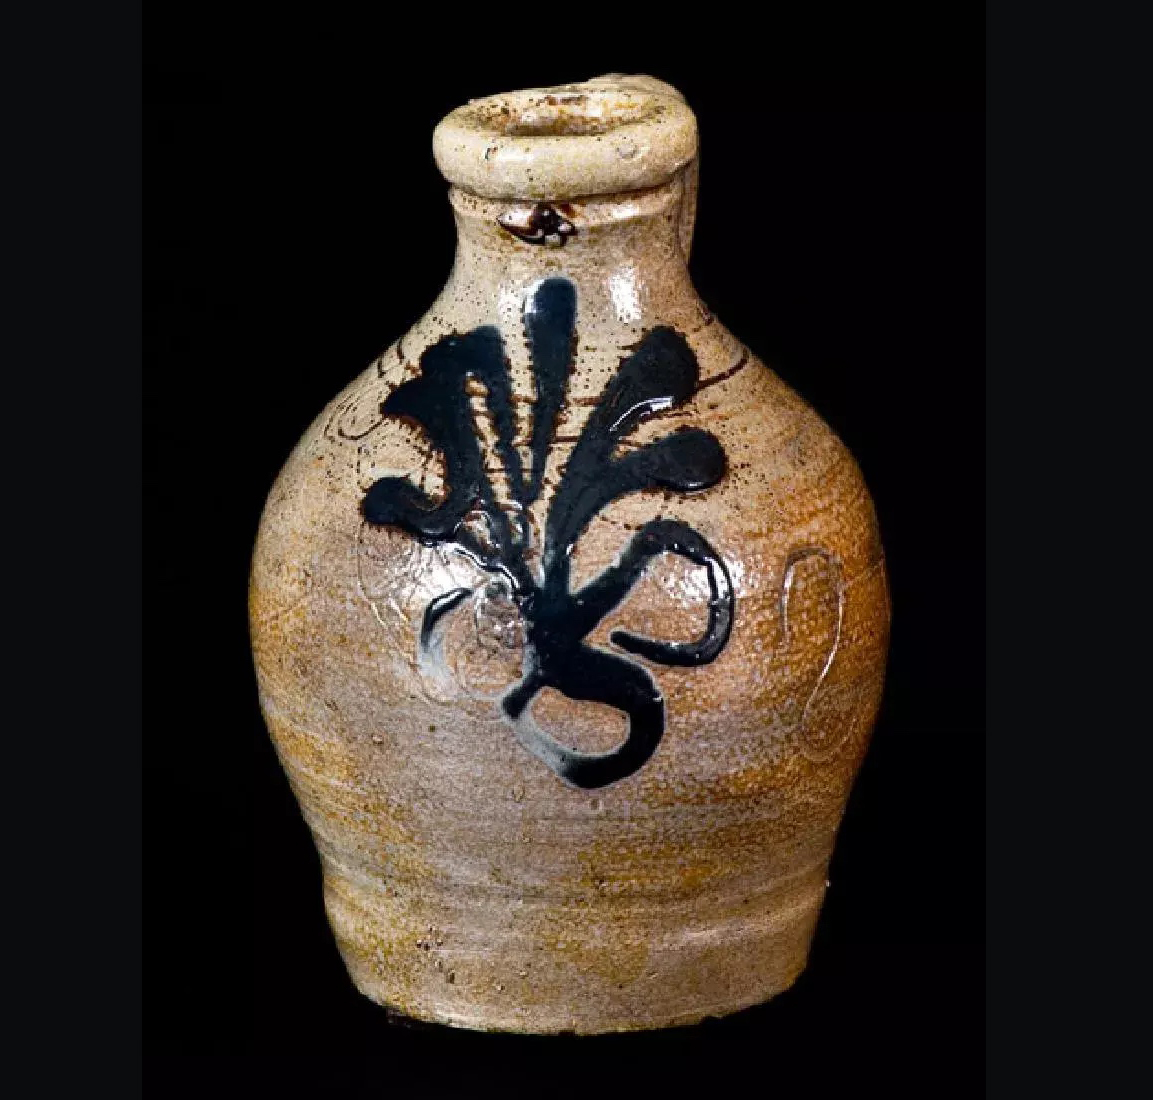 This circa-1745 miniature stoneware jug attributed to Adam States Sr. achieved $31,000 plus the buyer’s premium in March 2017. Image courtesy of Crocker Farm and LiveAuctioneers.